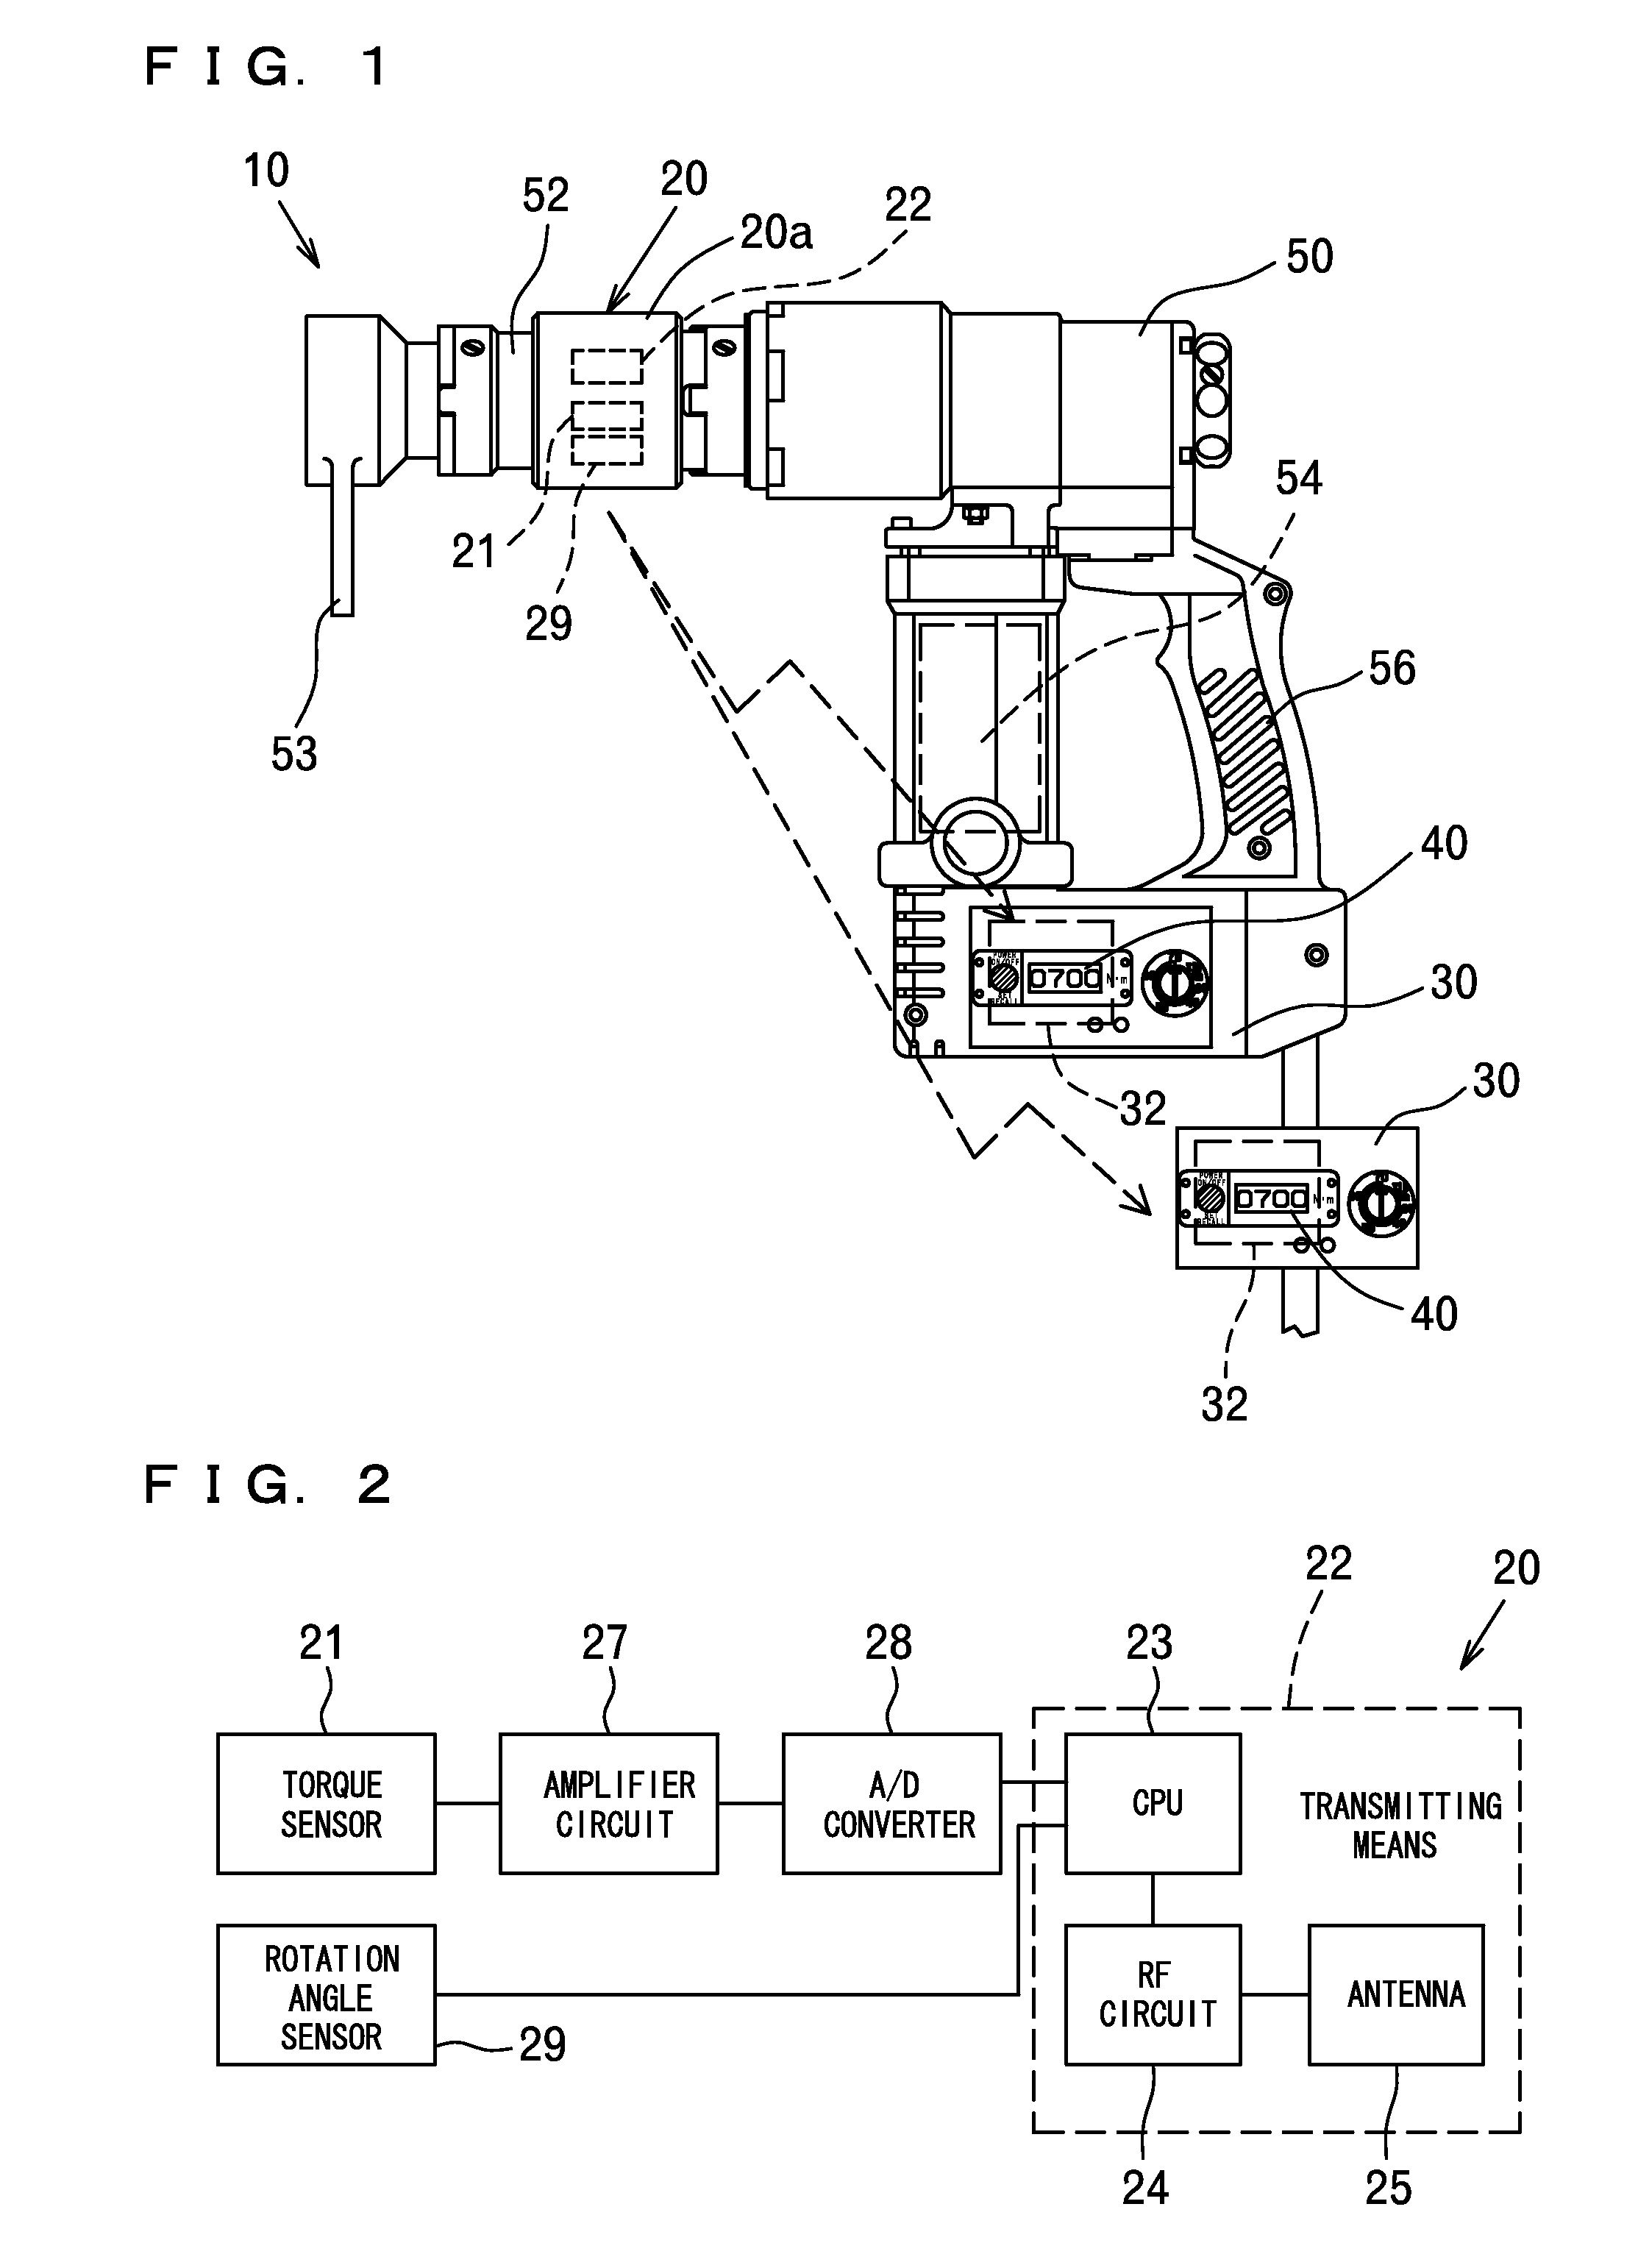 Wireless data transmitting and receiving system